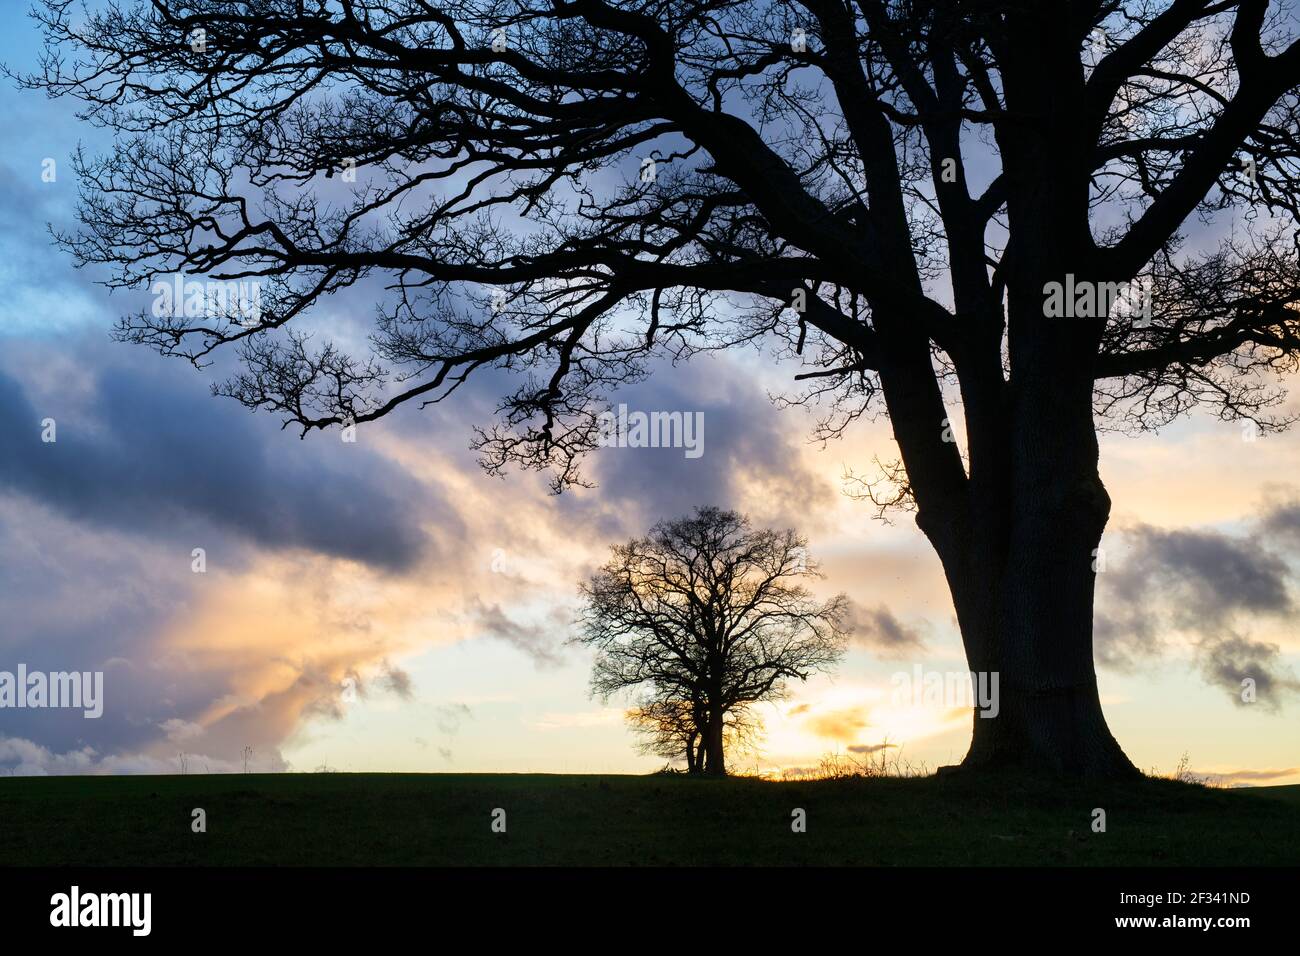 Silhouette Oak trees in the winter at sunset. Leafield, Cotswolds, Oxfordshire, England Stock Photo